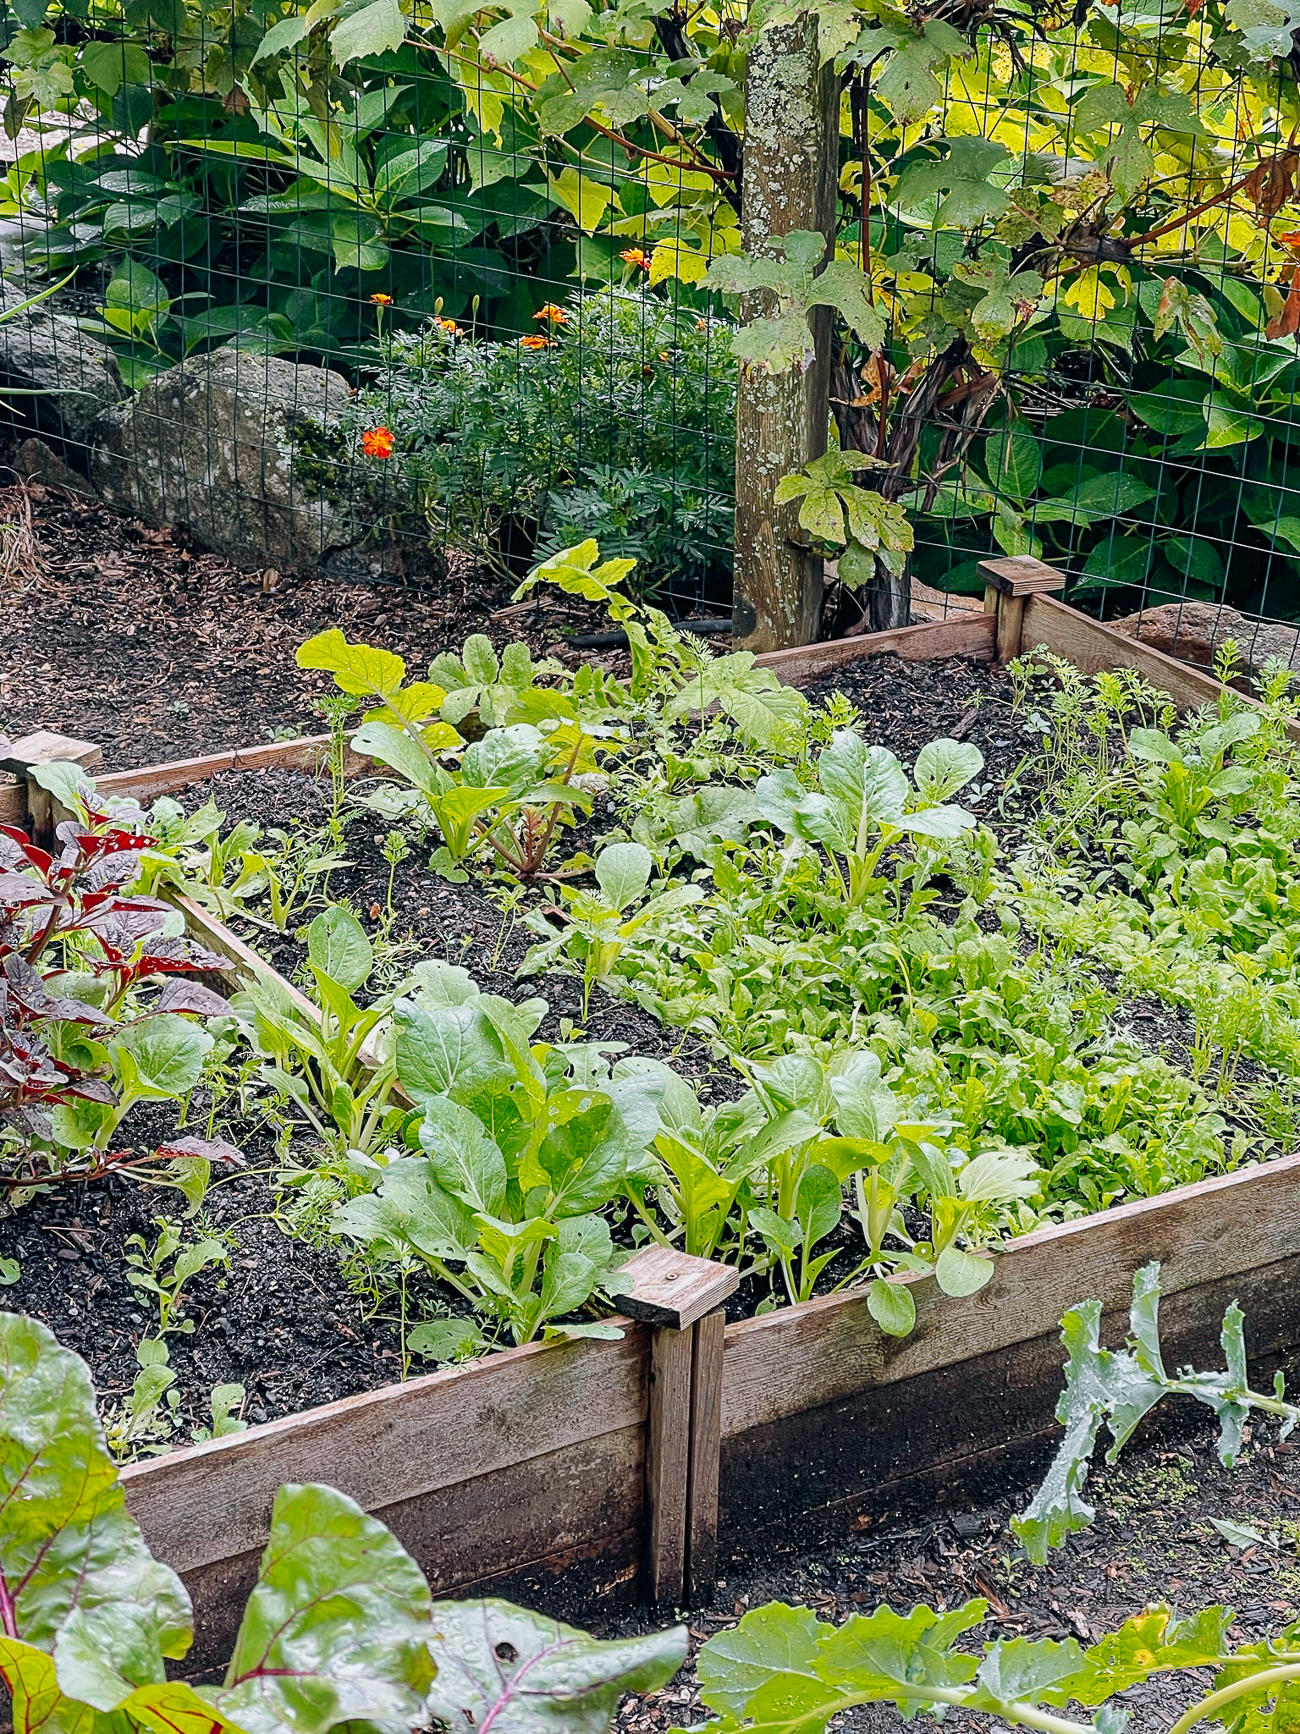 Growing leafy greens in raised beds